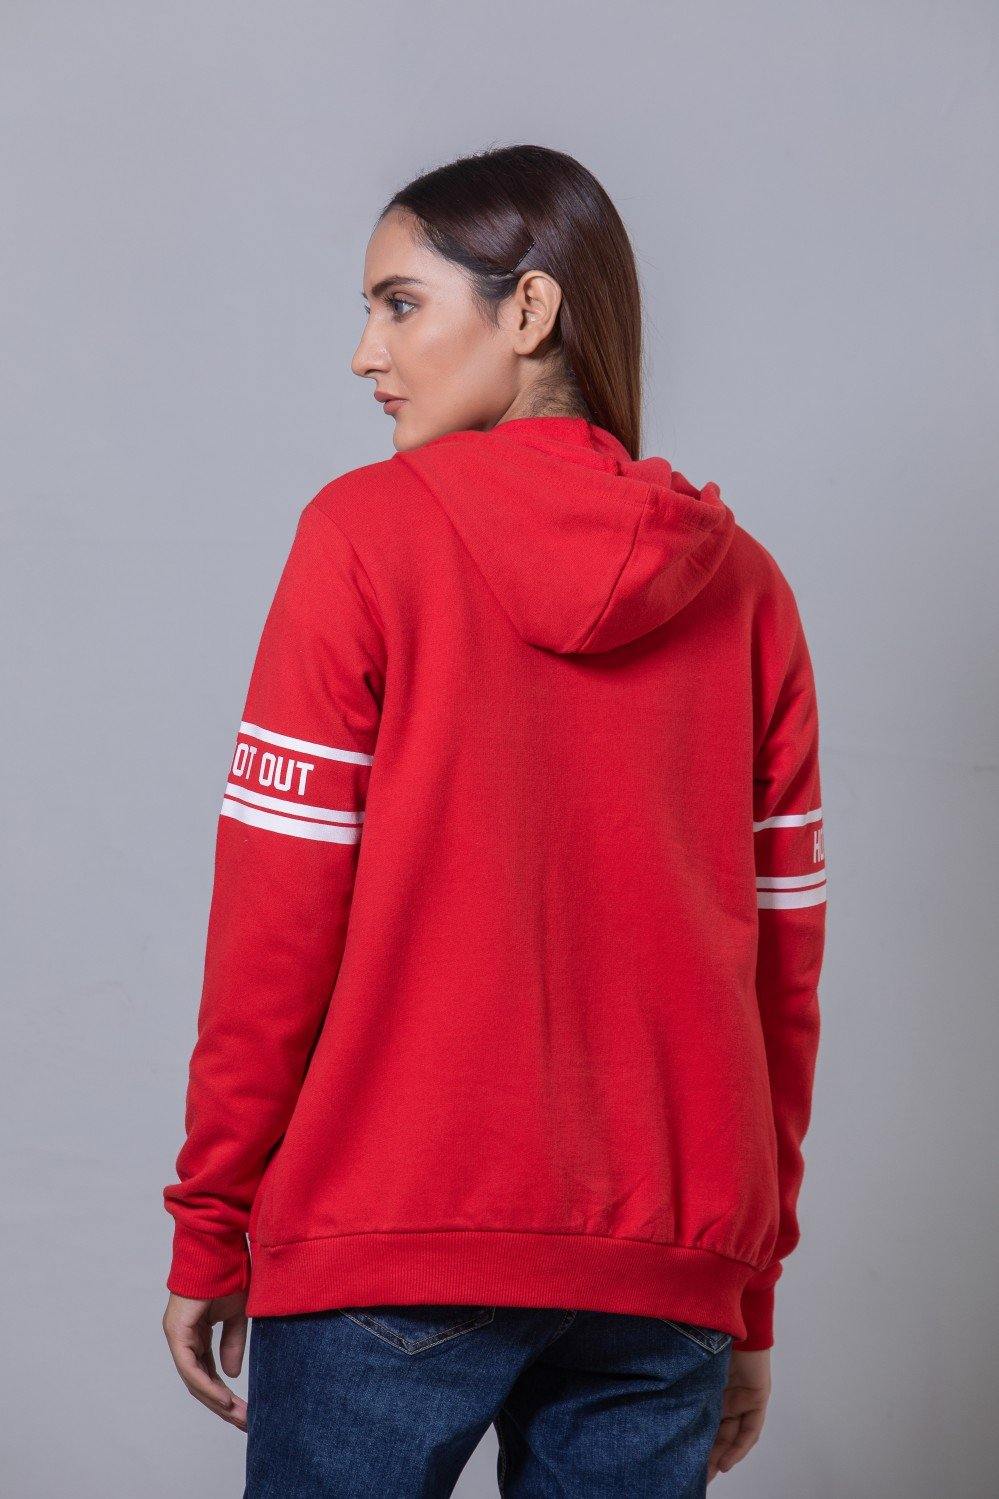 Hope Not Out by Shahid Afridi Women Hoody Red Hoody HWKHF20025